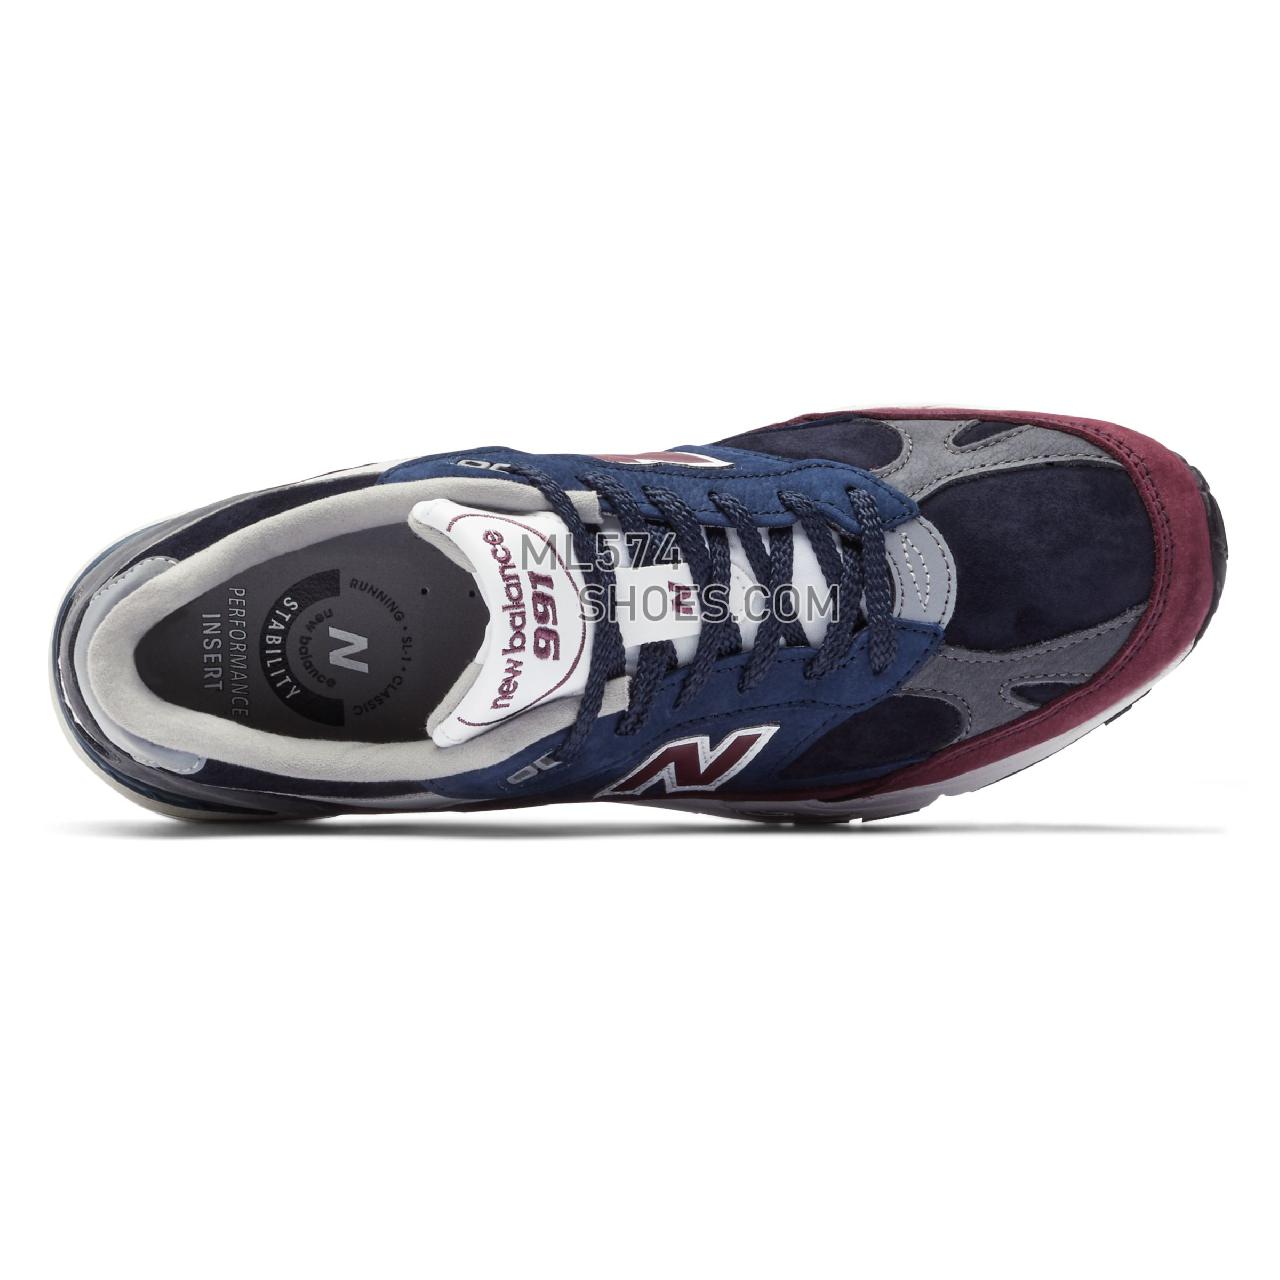 New Balance Made in UK 991 - Men's Made in USA And UK Sneakers - Navy Burgundy - M991RKB